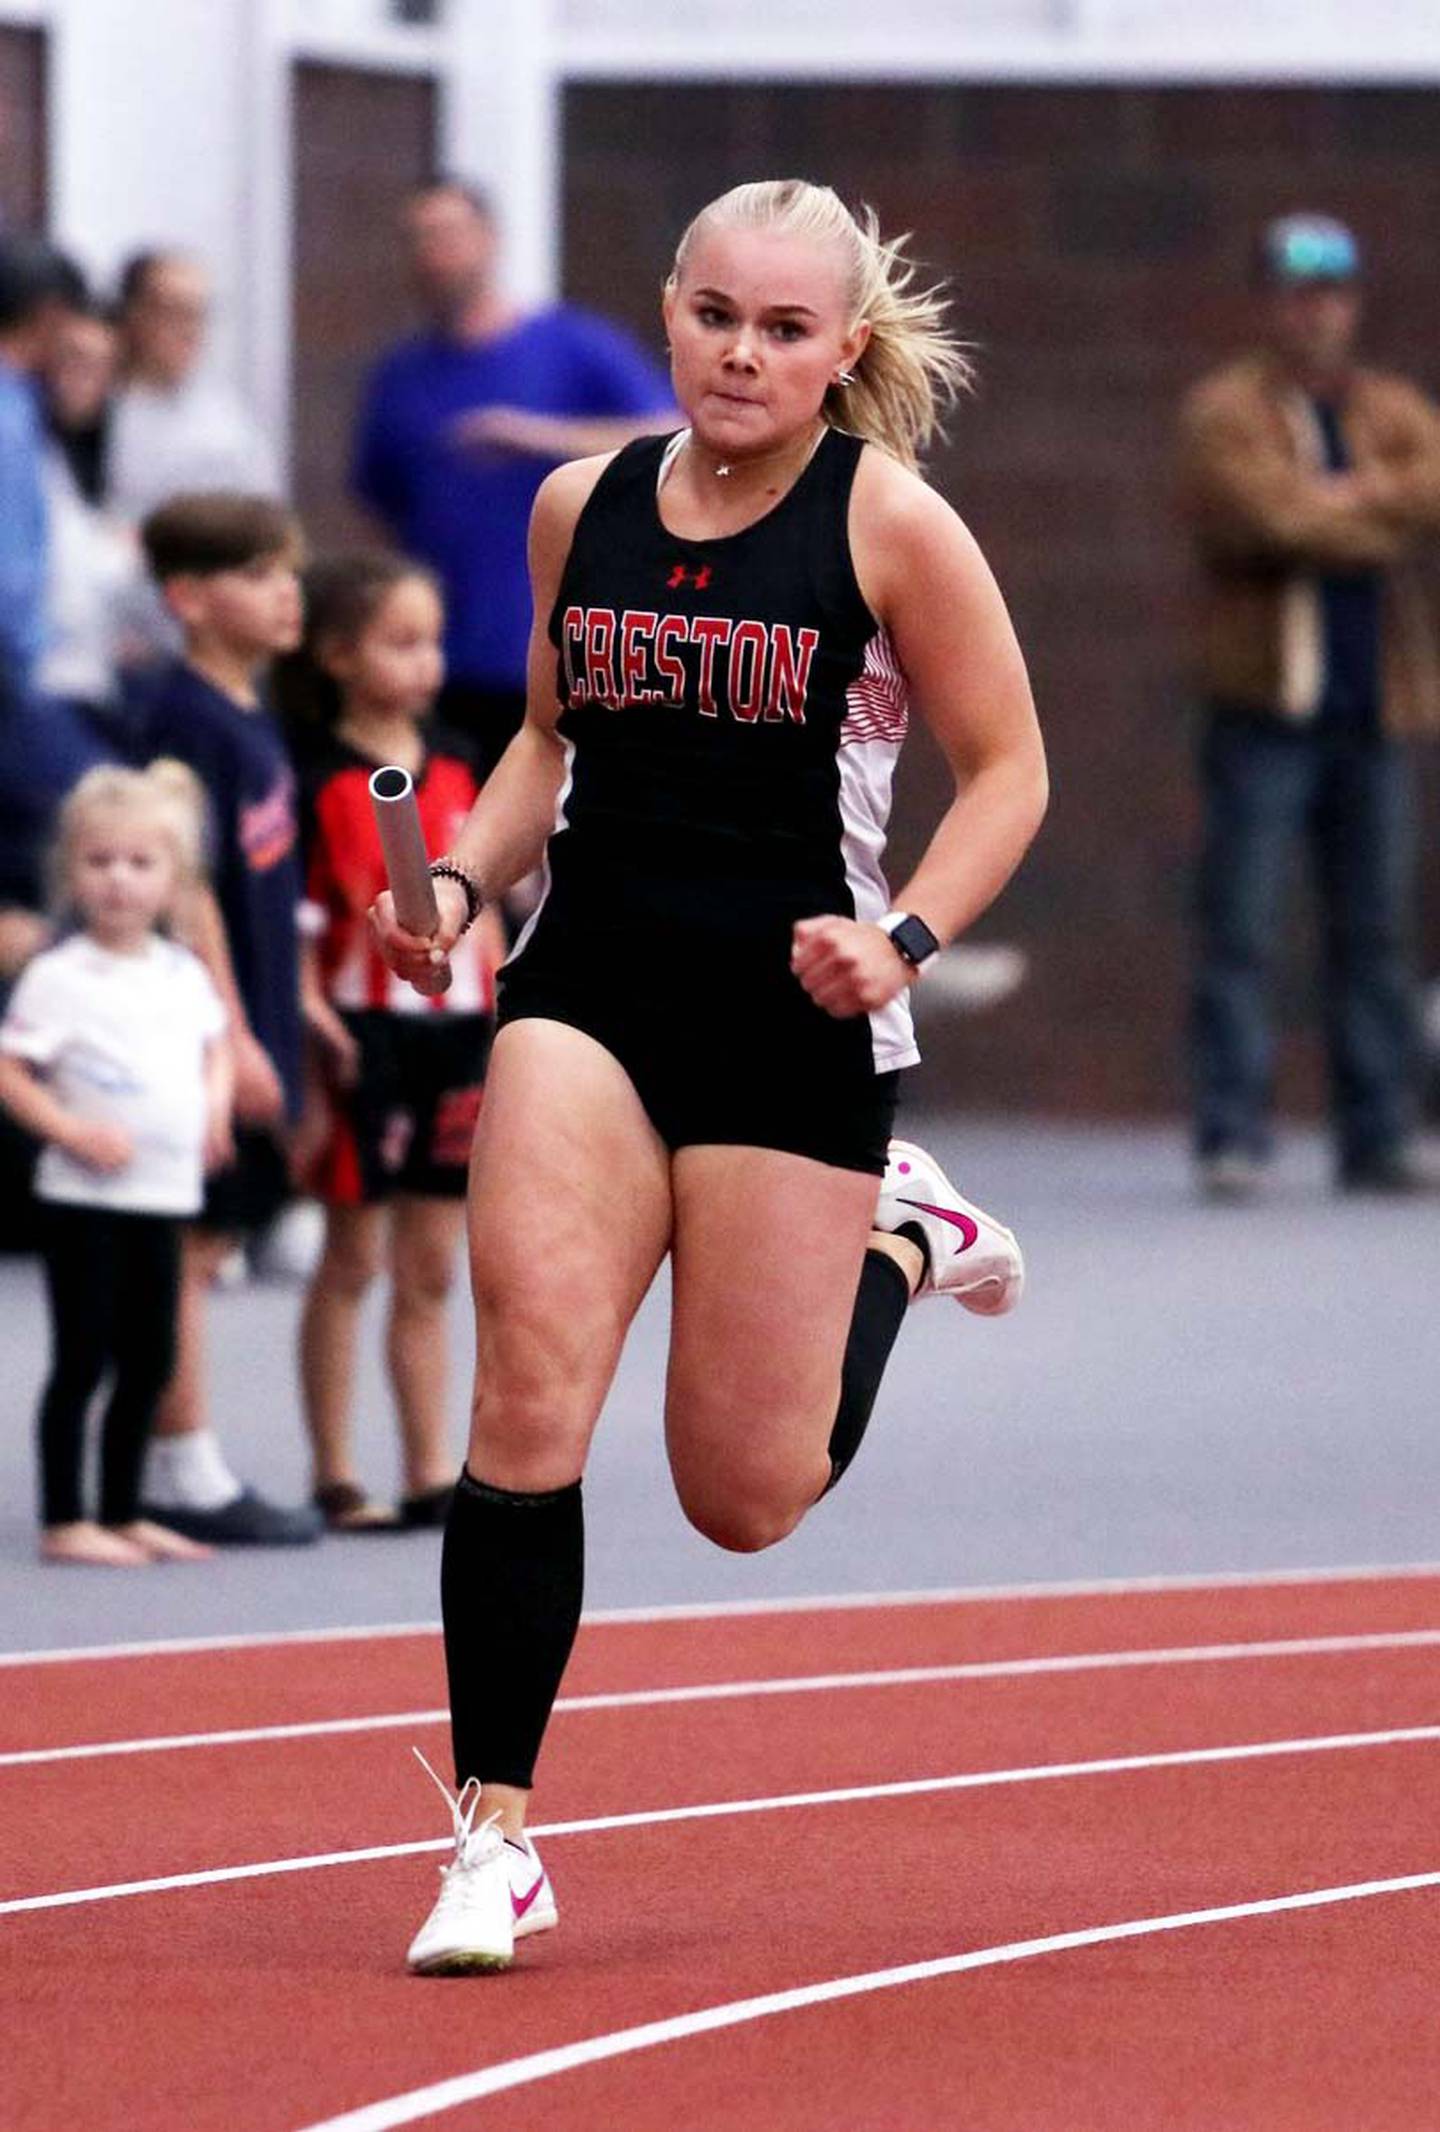 Maylee Riley of Creston runs a relay leg Saturday. Riley was a part of the sprint medley team that took 11th place with a time of 4:51.84.